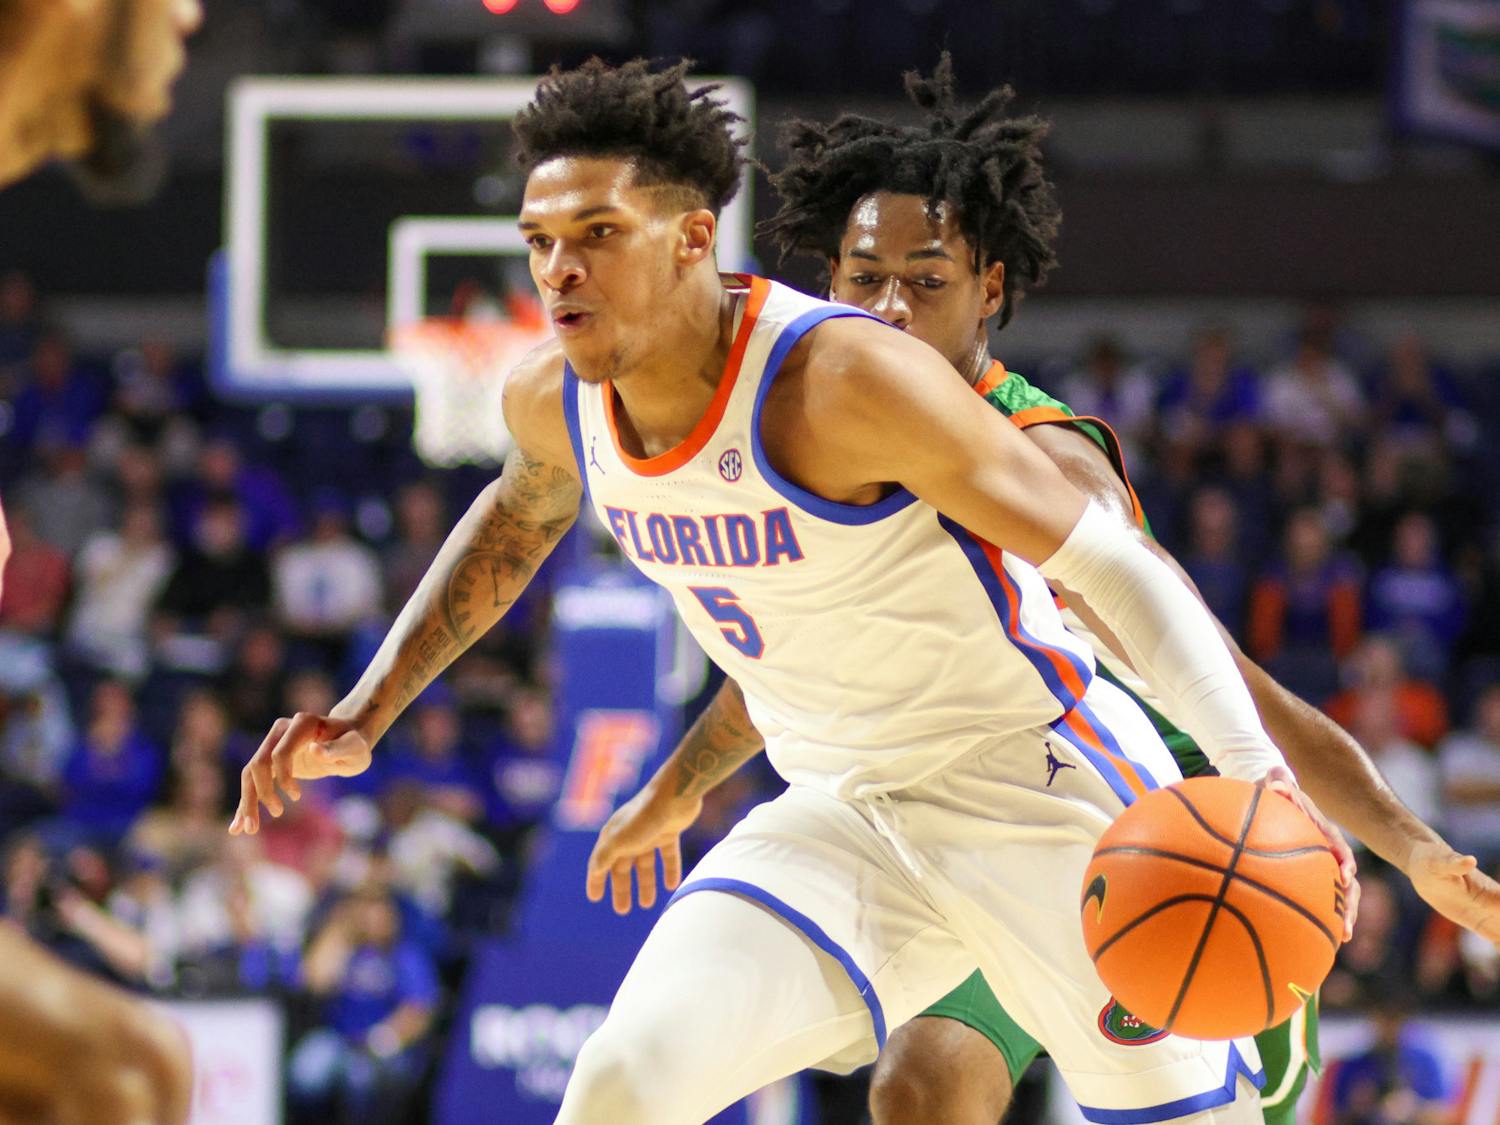 Junior guard Will Richard drives with the ball in the Gators' 89-68 win against the Florida A&M Rattlers on Tuesday, Nov. 14, 2023.